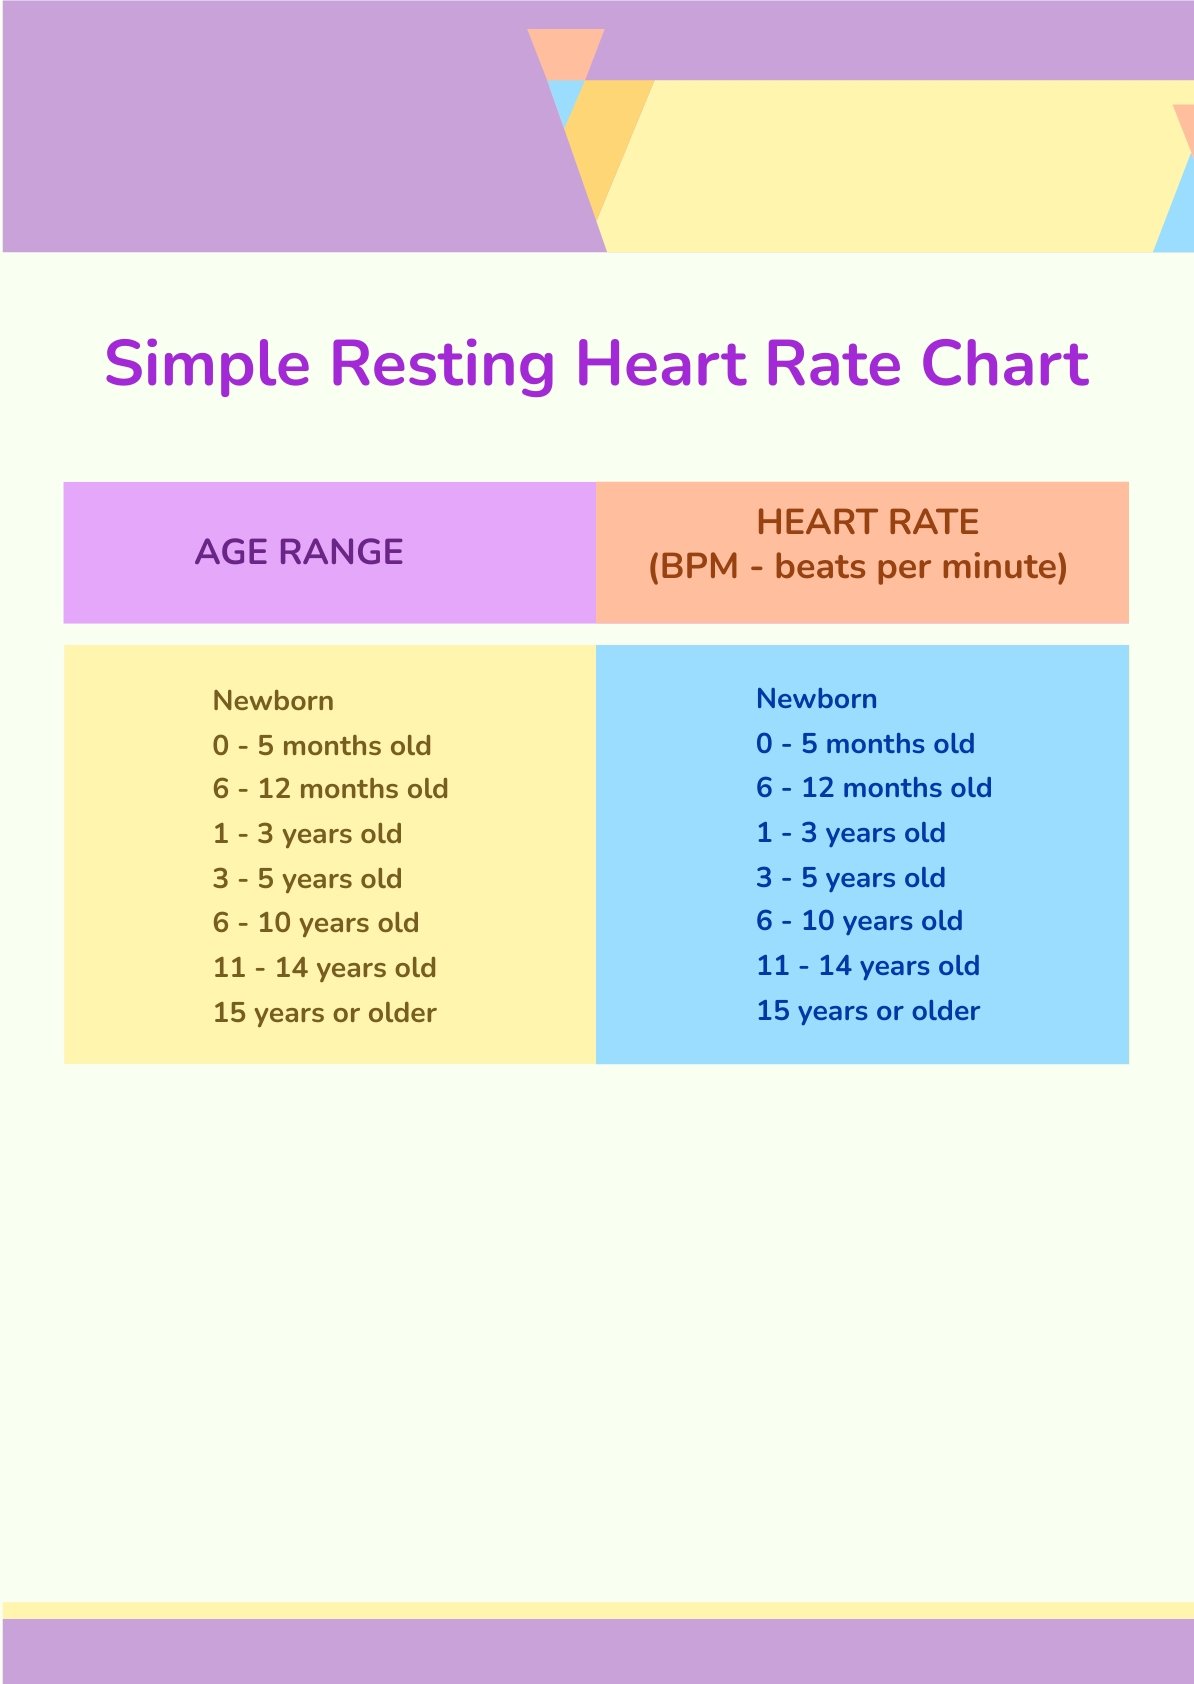 Simple Resting Heart Rate Chart